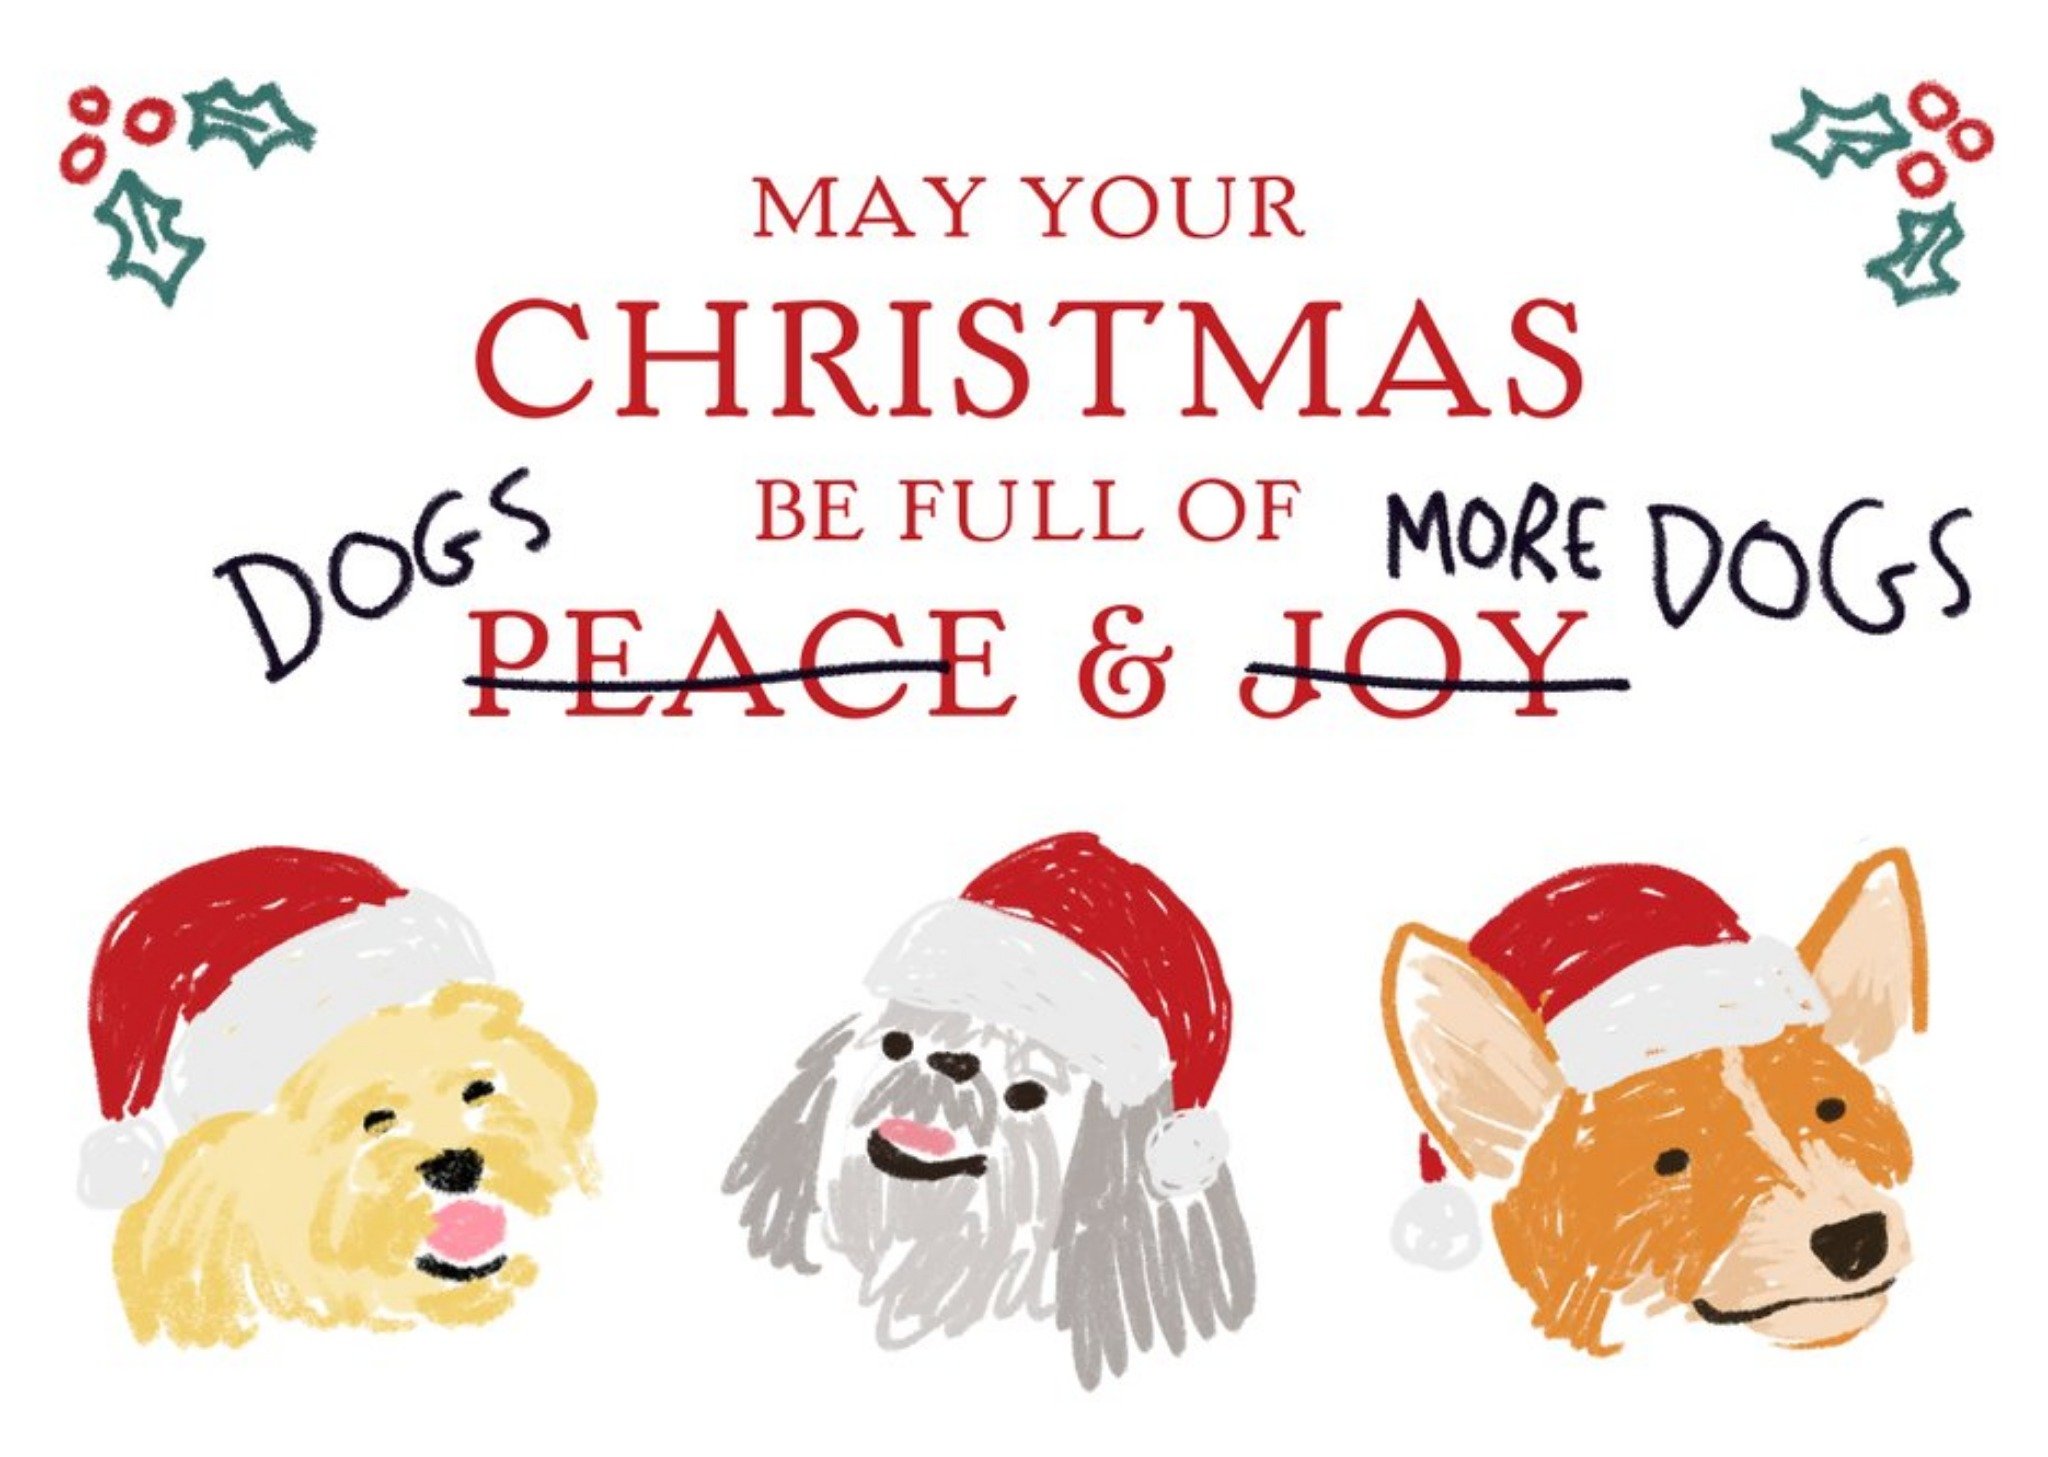 Moonpig Funny Humour Comedy Christmas Card May Your Christmas Be Filled With Dogs And More Dogs, Lar